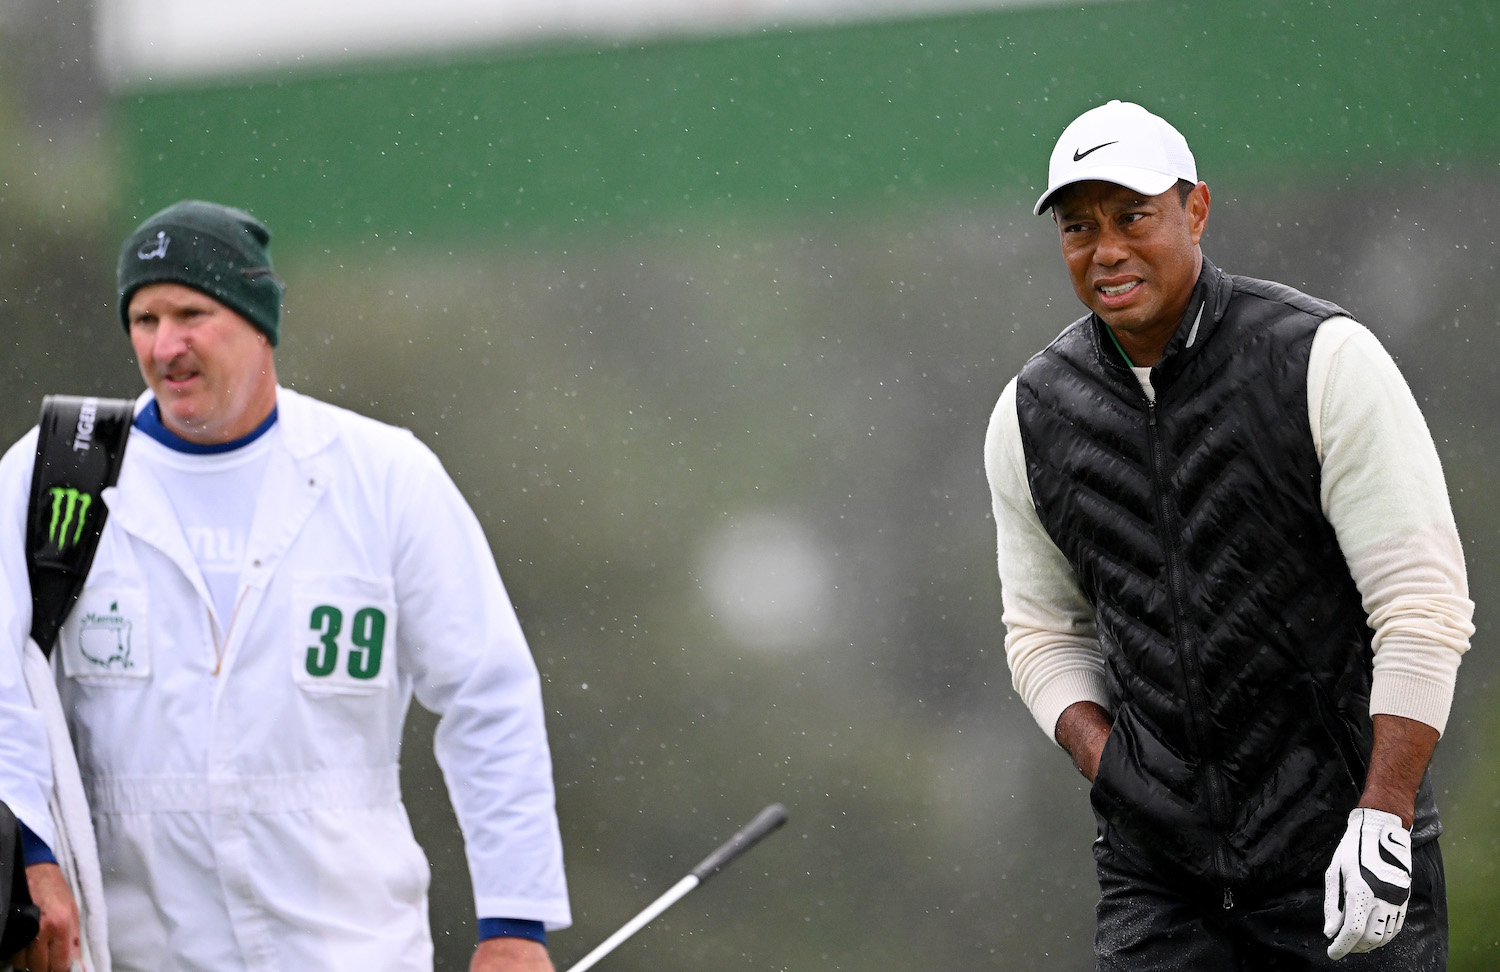 2023 Masters: Tiger Woods and Phil Mickelson Are Back - The New York Times